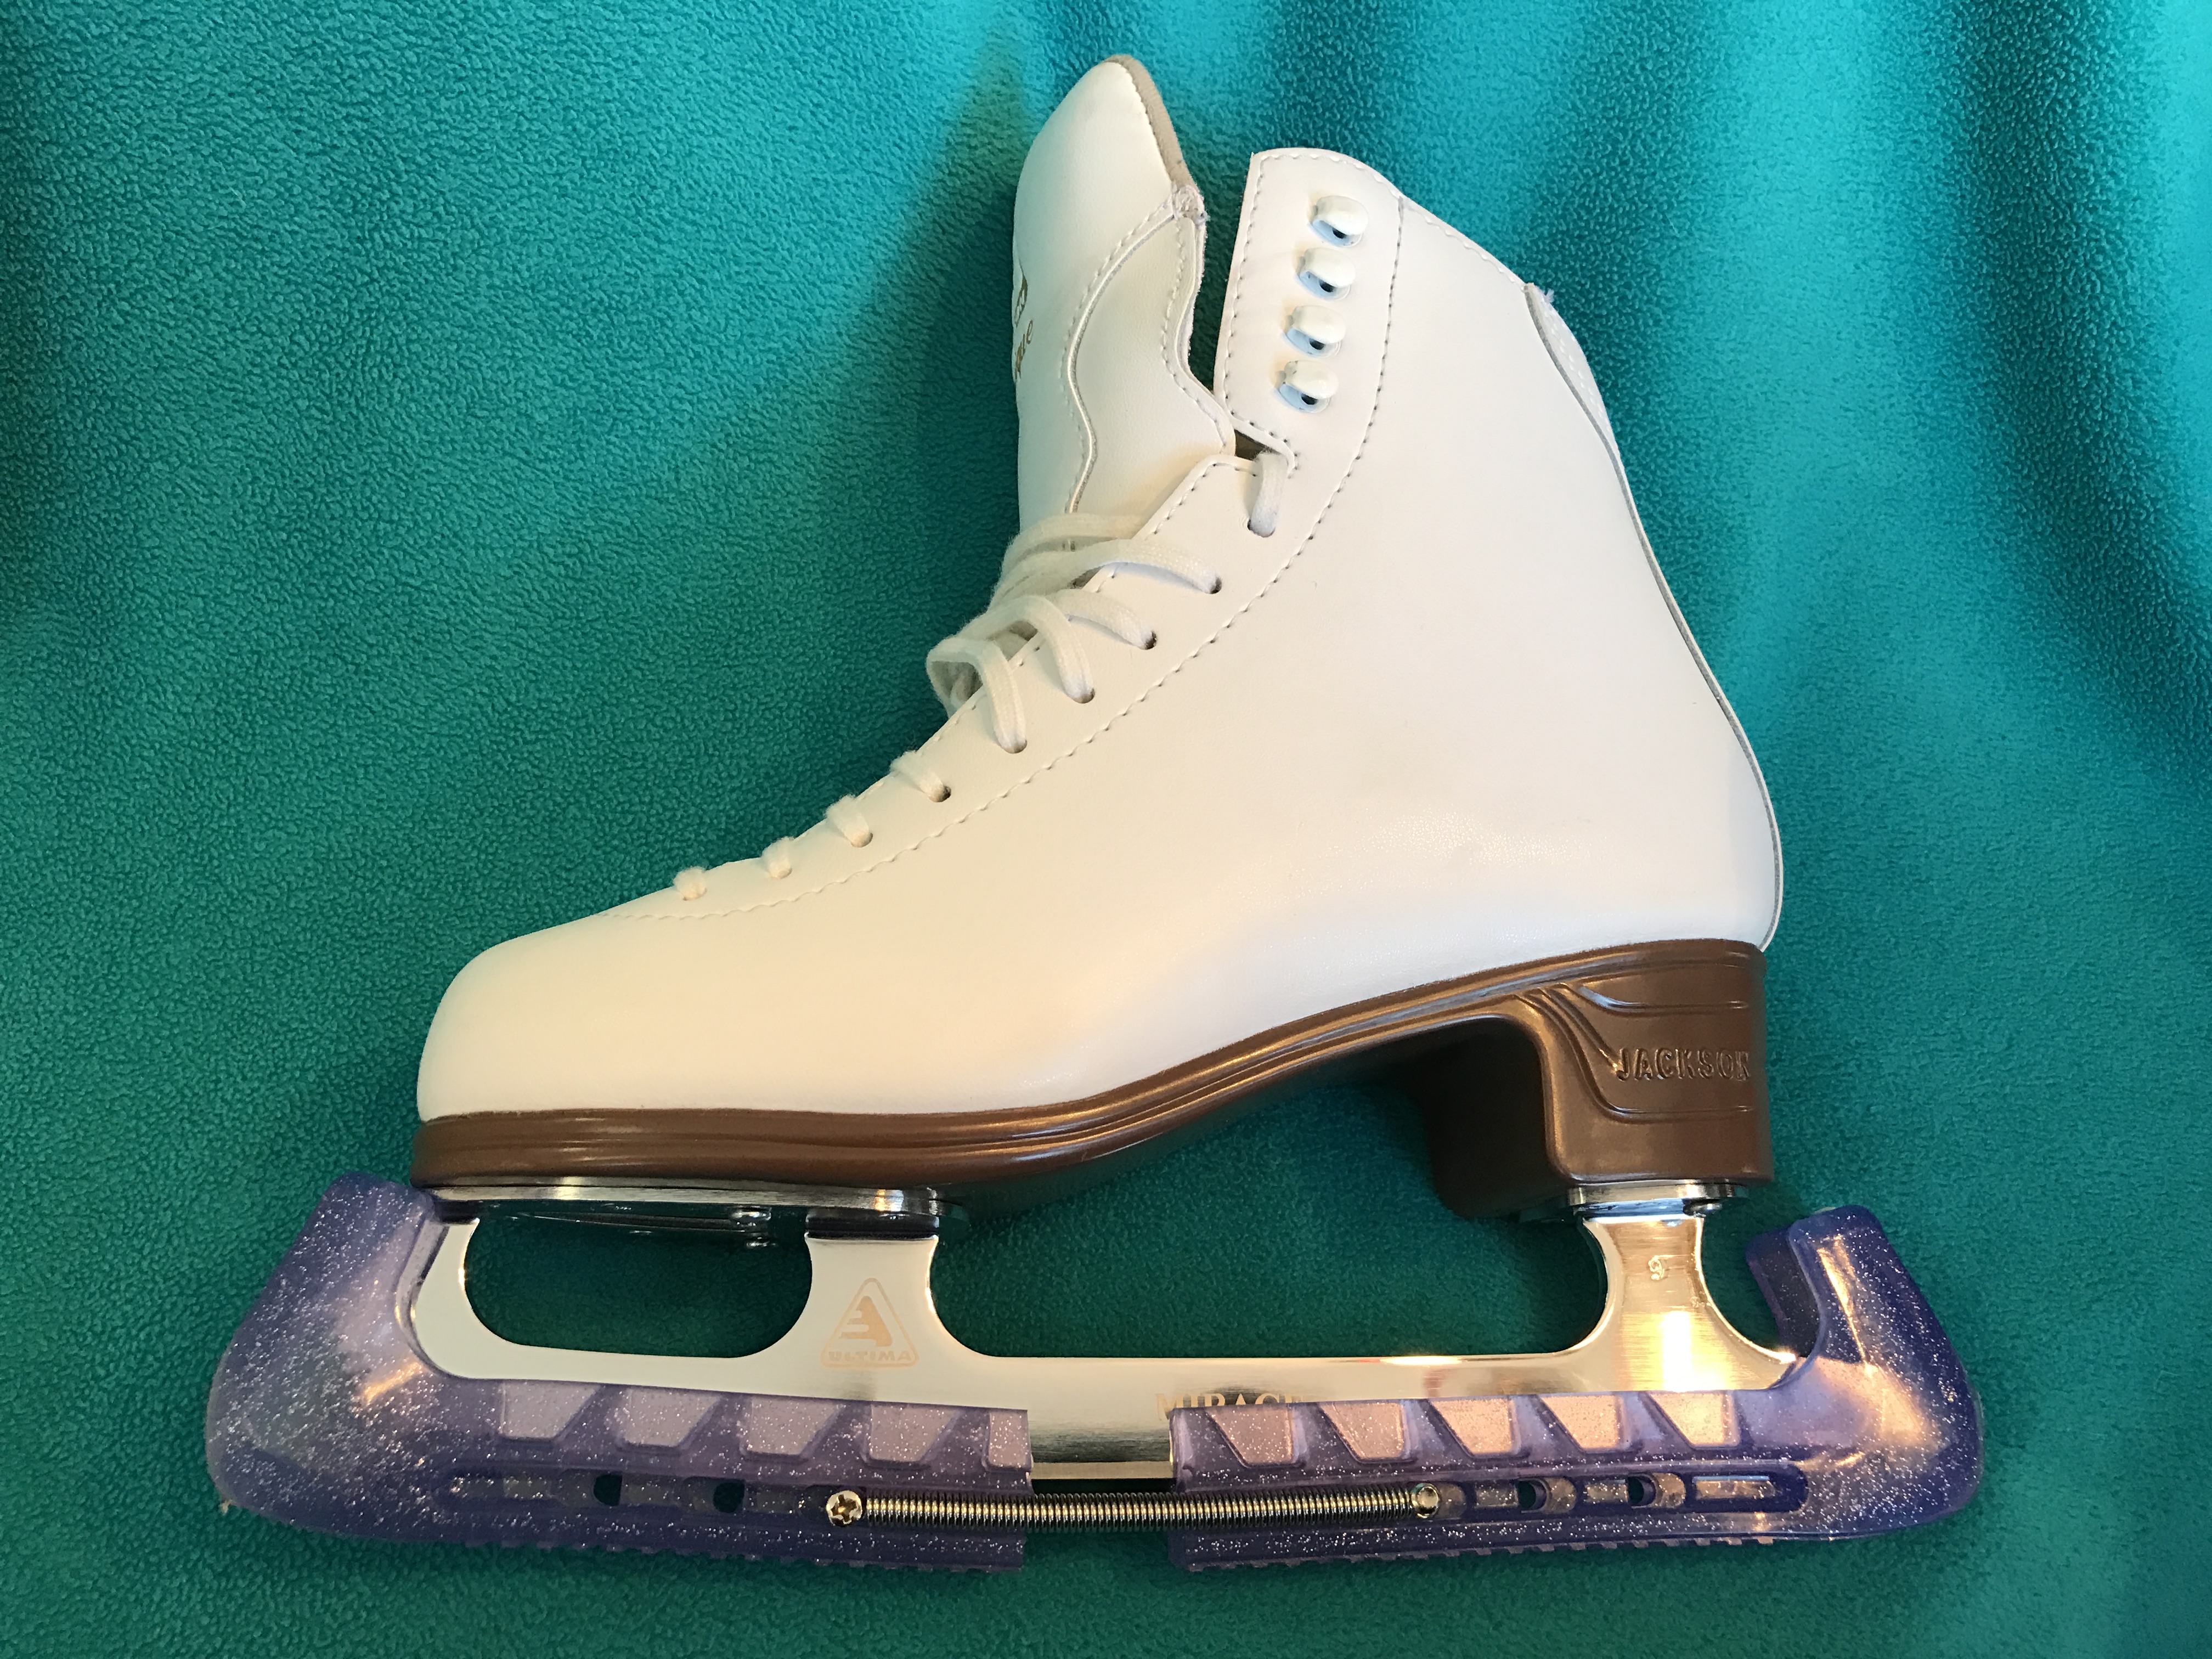 Ice Skate Blade Covers - Guards for Hockey Skates, Figure Skates, and Ic Q2J1 Details about   1X 